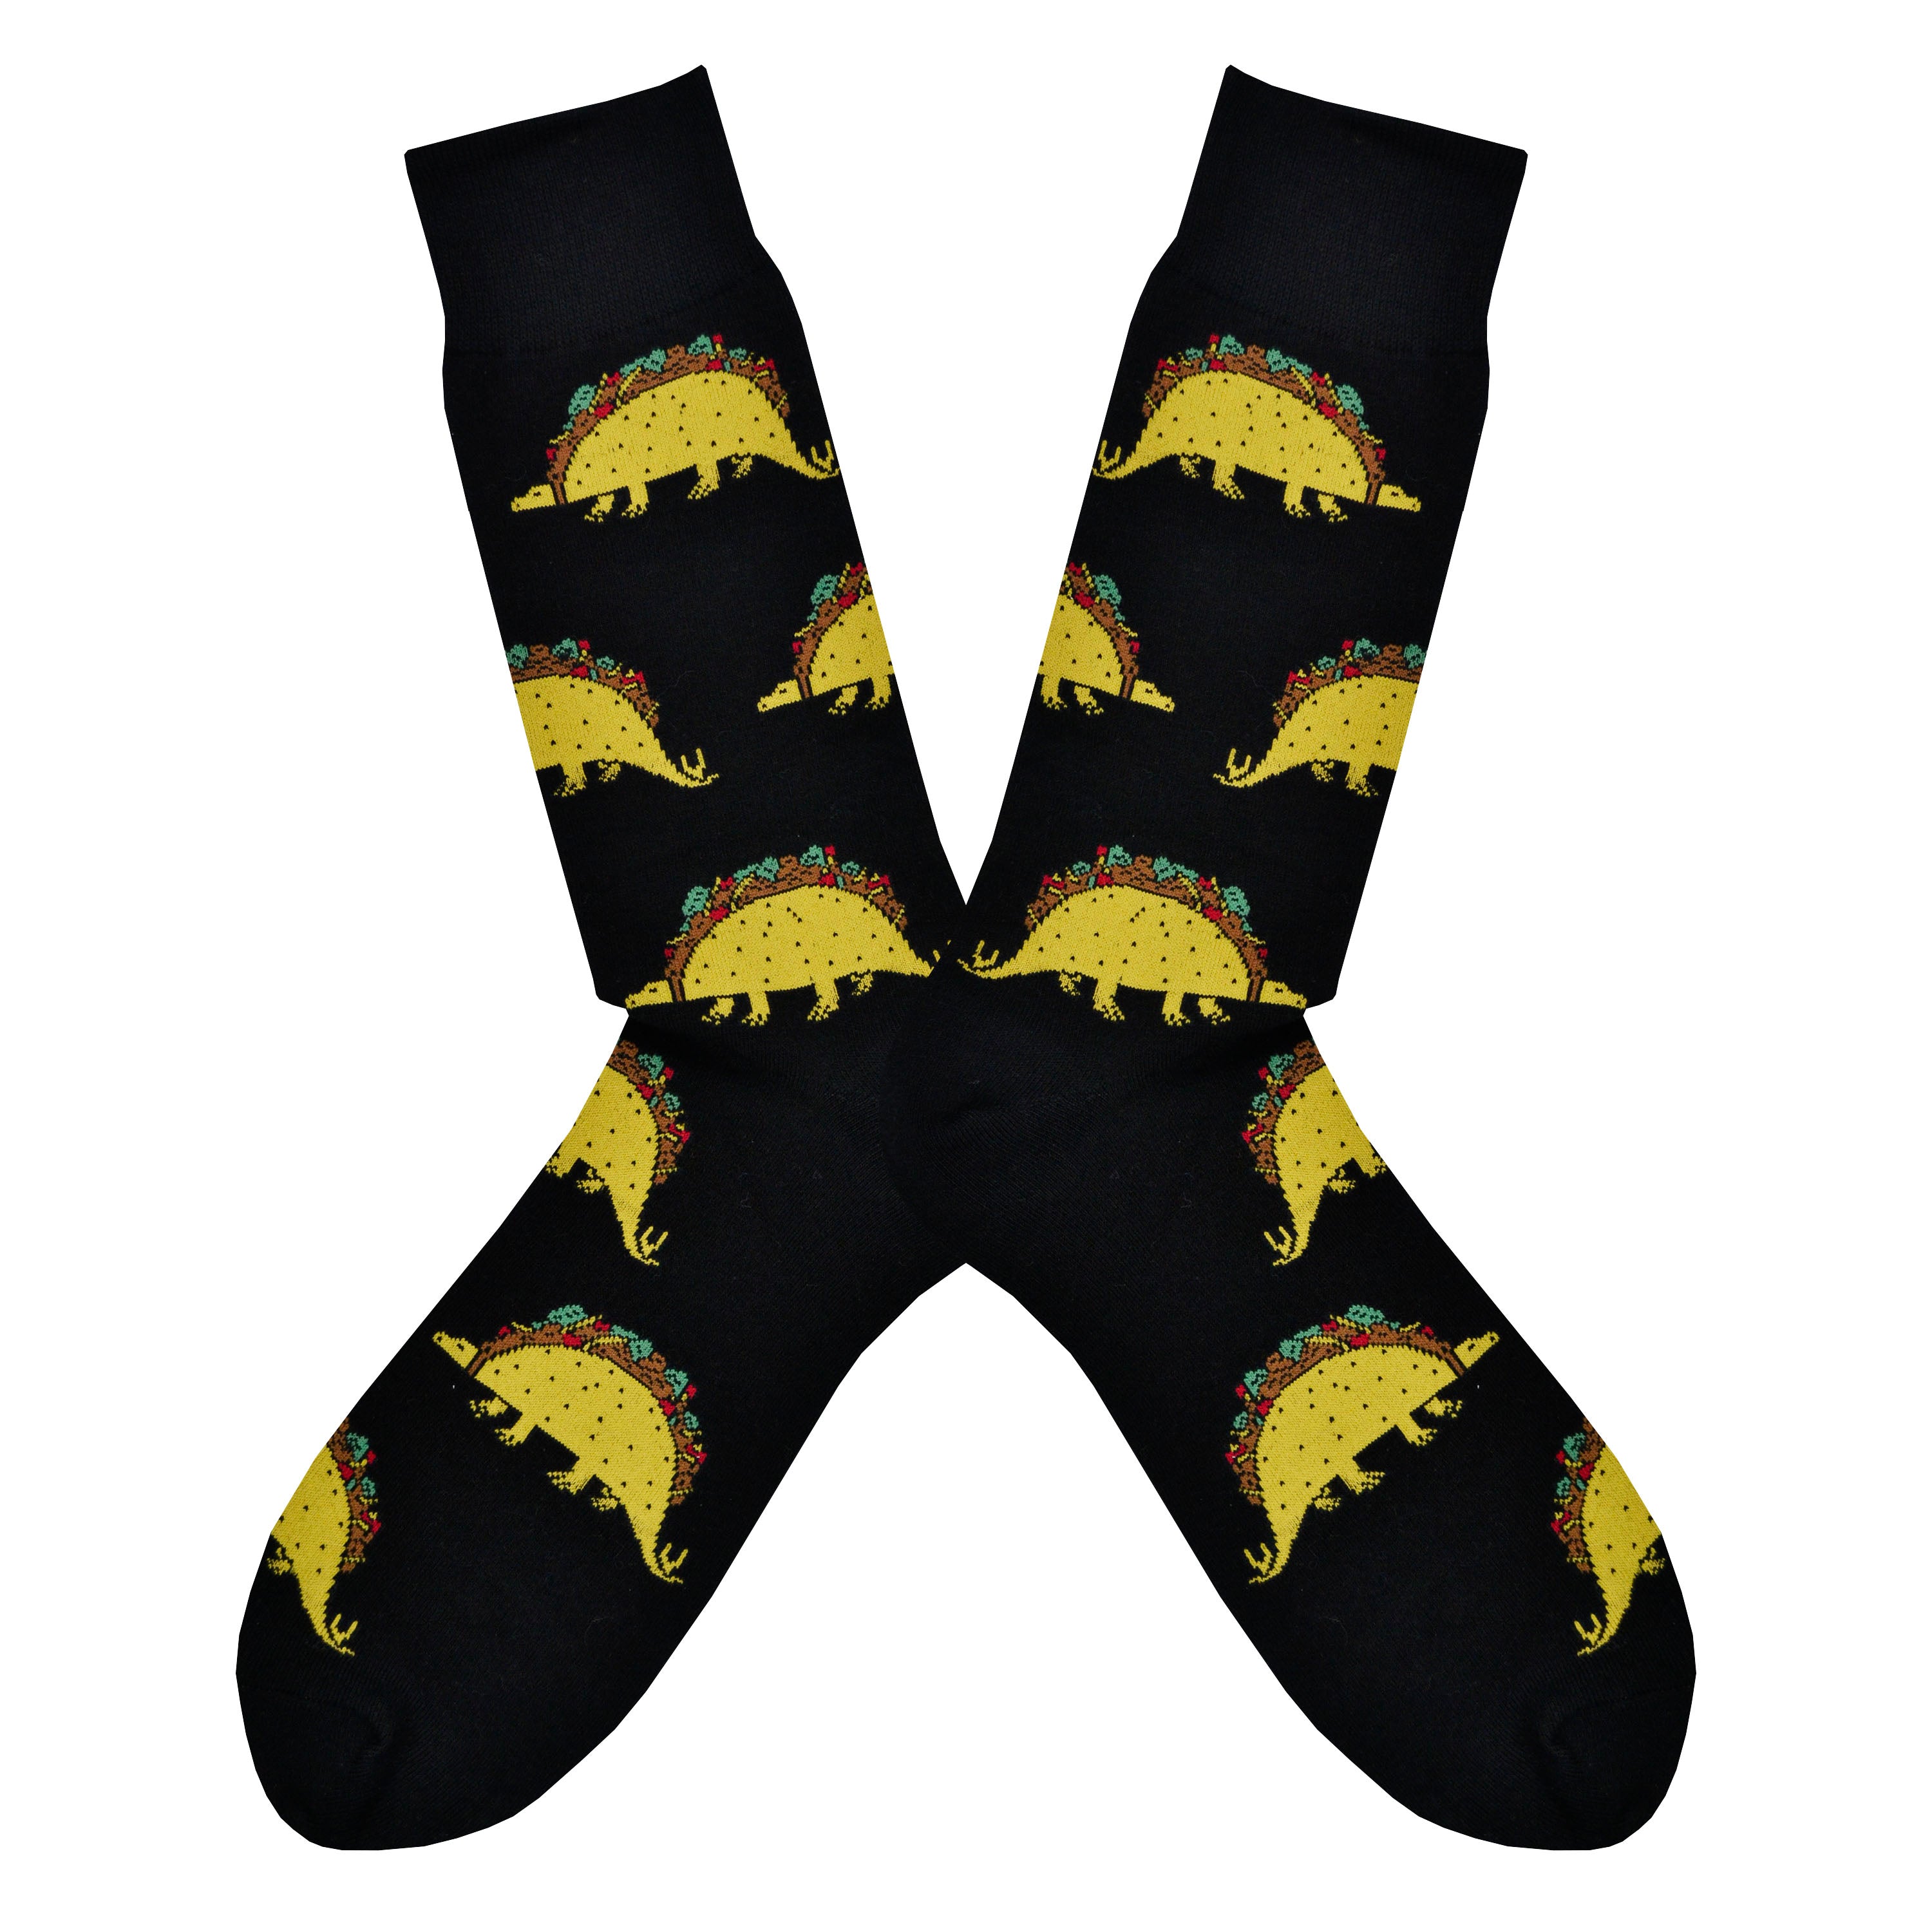 These black cotton men's crew socks by the brand Sock It To Me feature dinosaurs with bodies that look like a taco.